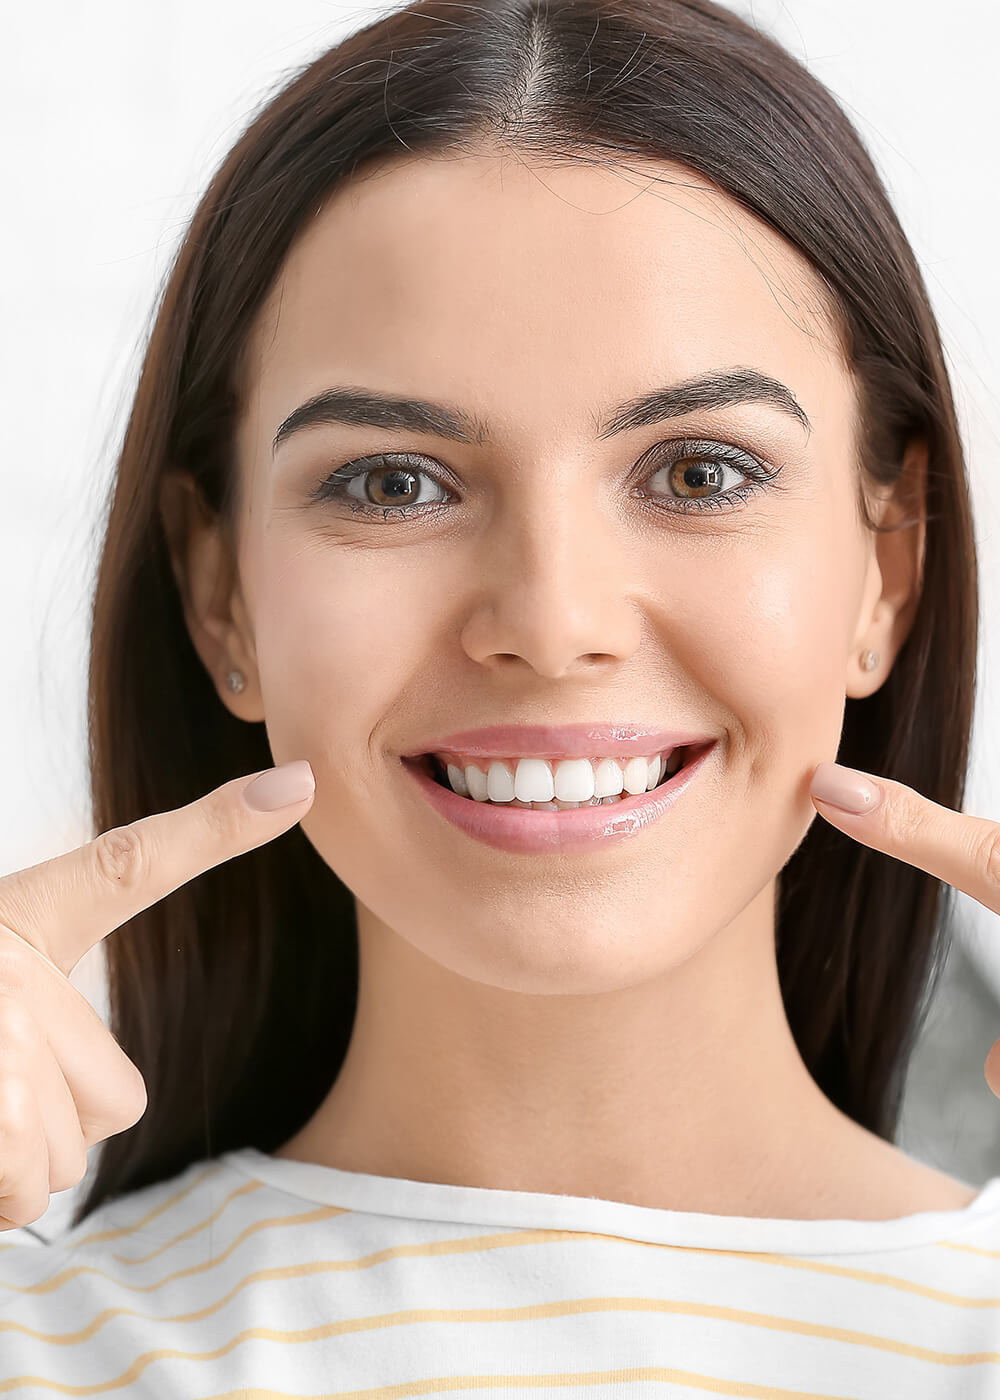 Does Teeth Whitening Damage Your Teeth: The Truth Uncovered